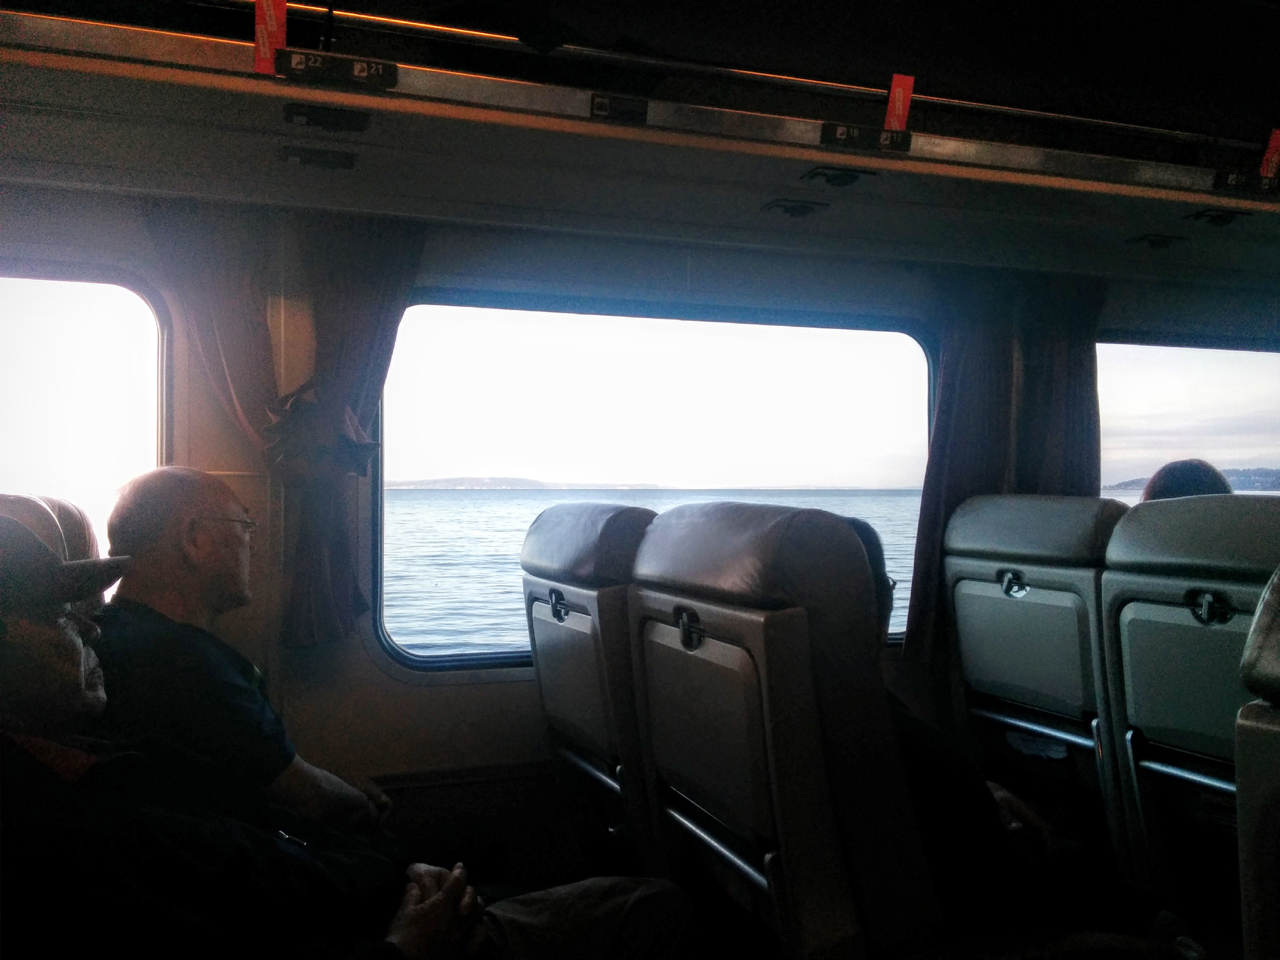 On board train overlooking Pacific